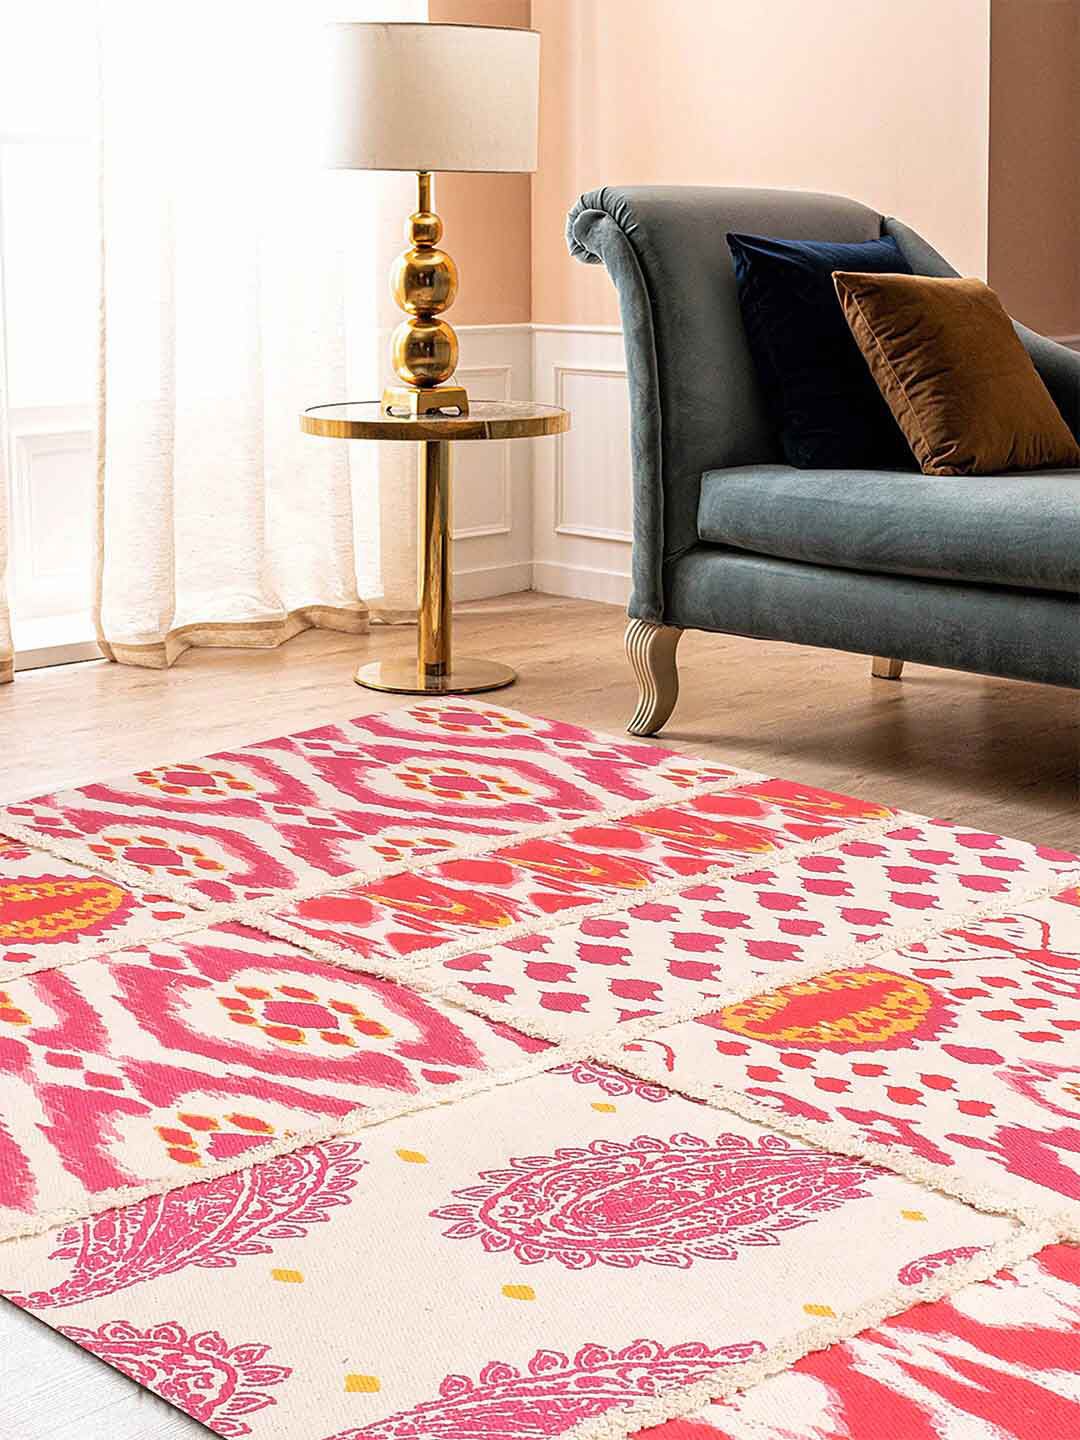 BLANC9 Beige Colored & Pink Patterned Cotton Carpets Price in India